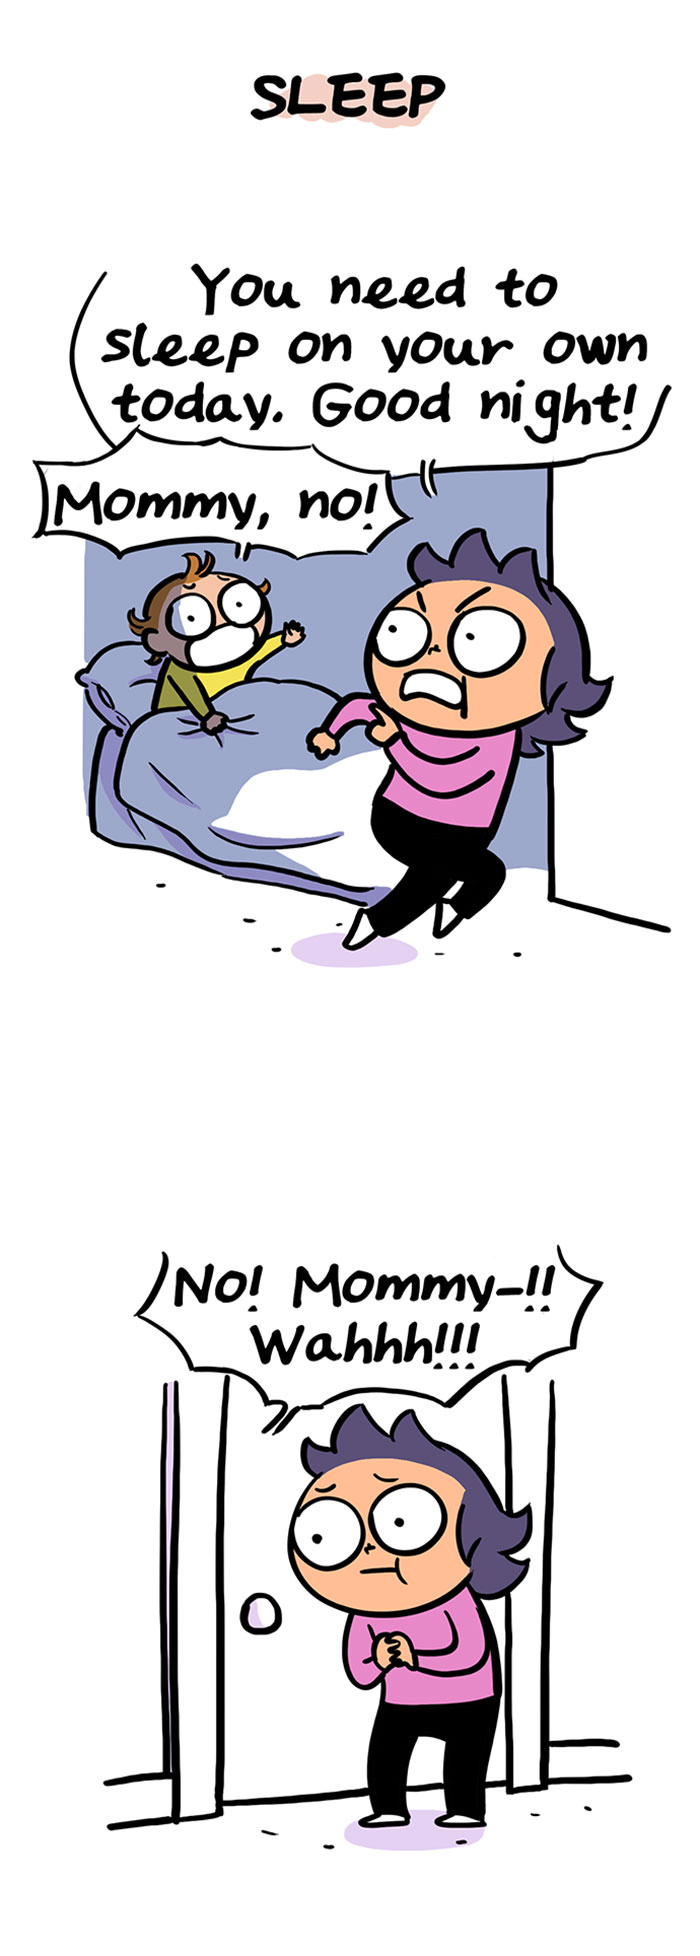 Mom Illustrates Things Her Kids Say In 10 Funny Illustrations